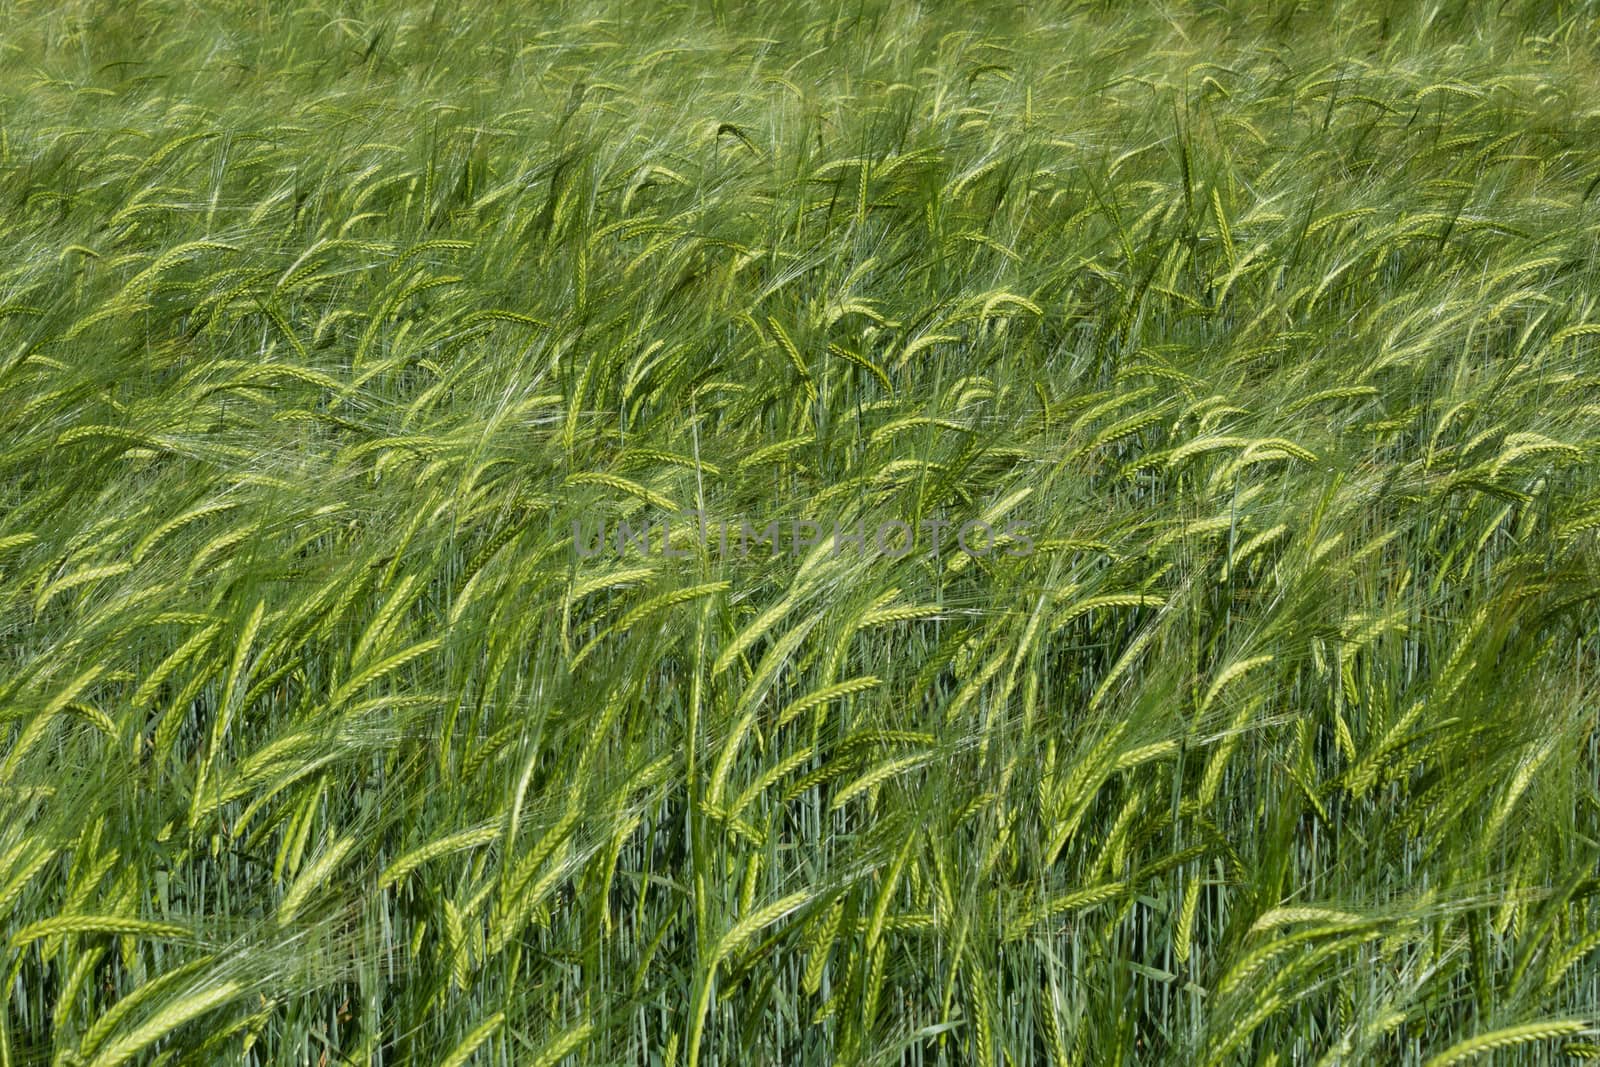 A cereal field close up ripening in the summer sun in Berkshire England